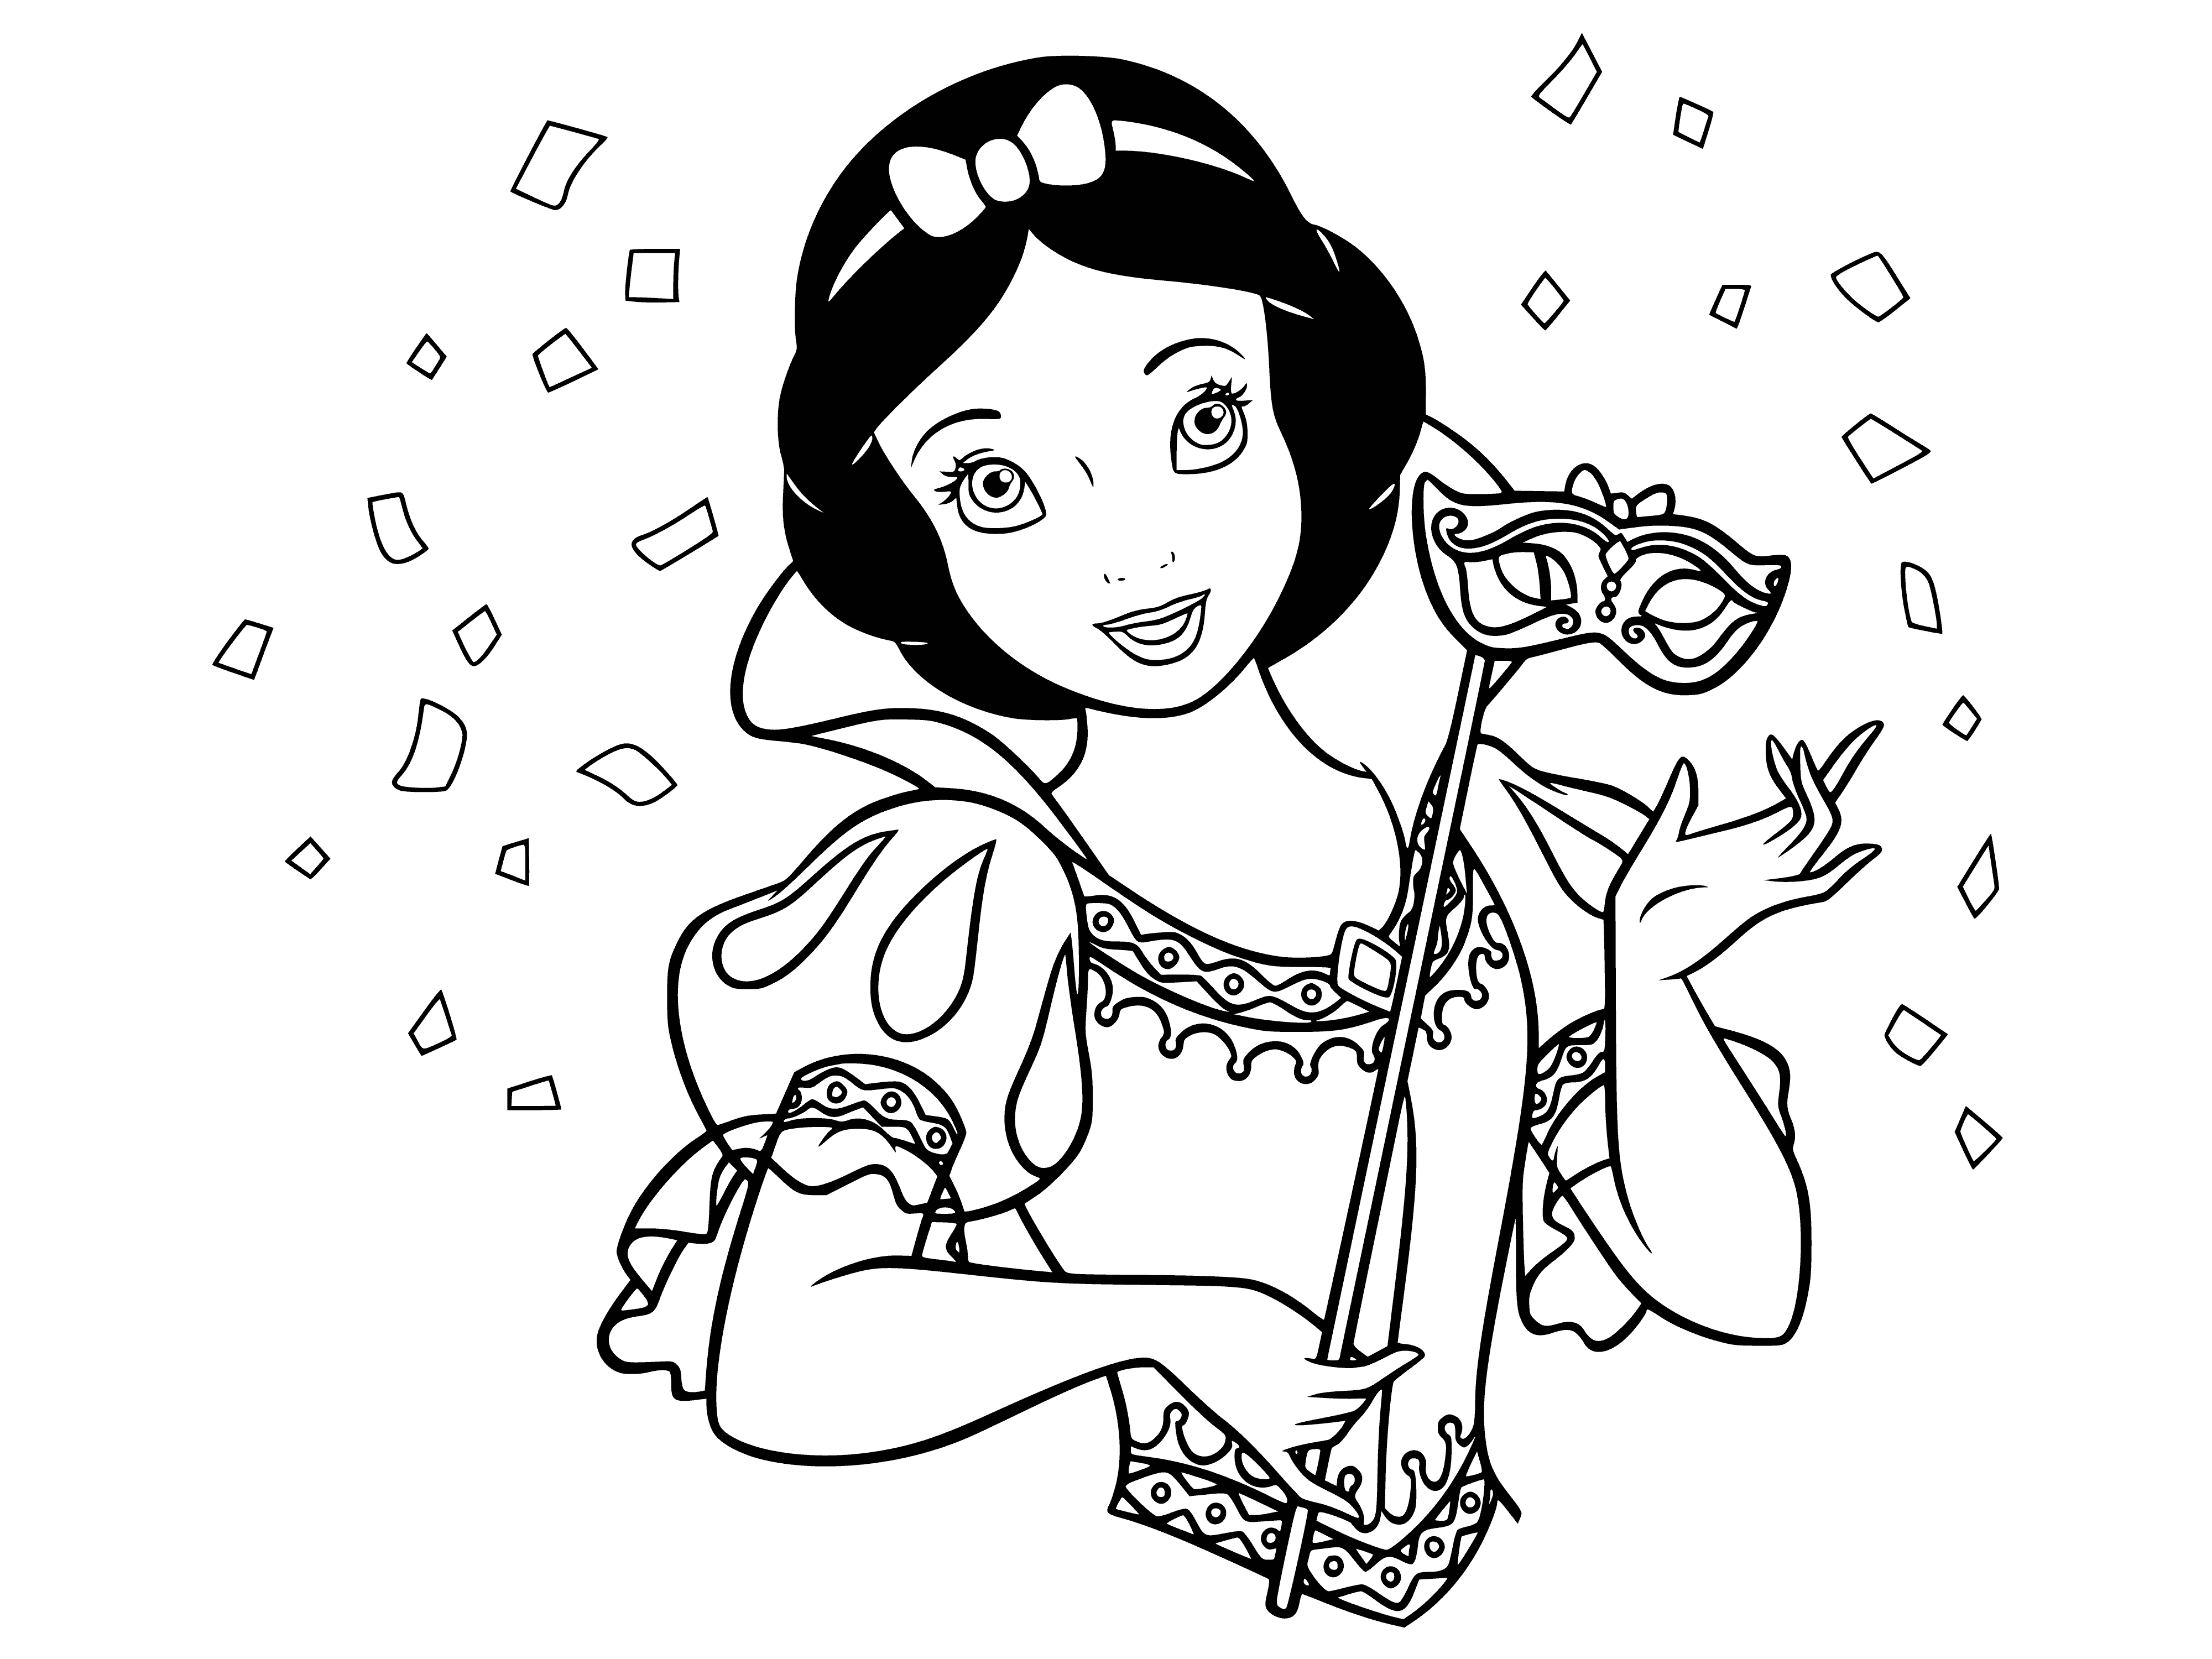 Snow white with mask coloring page